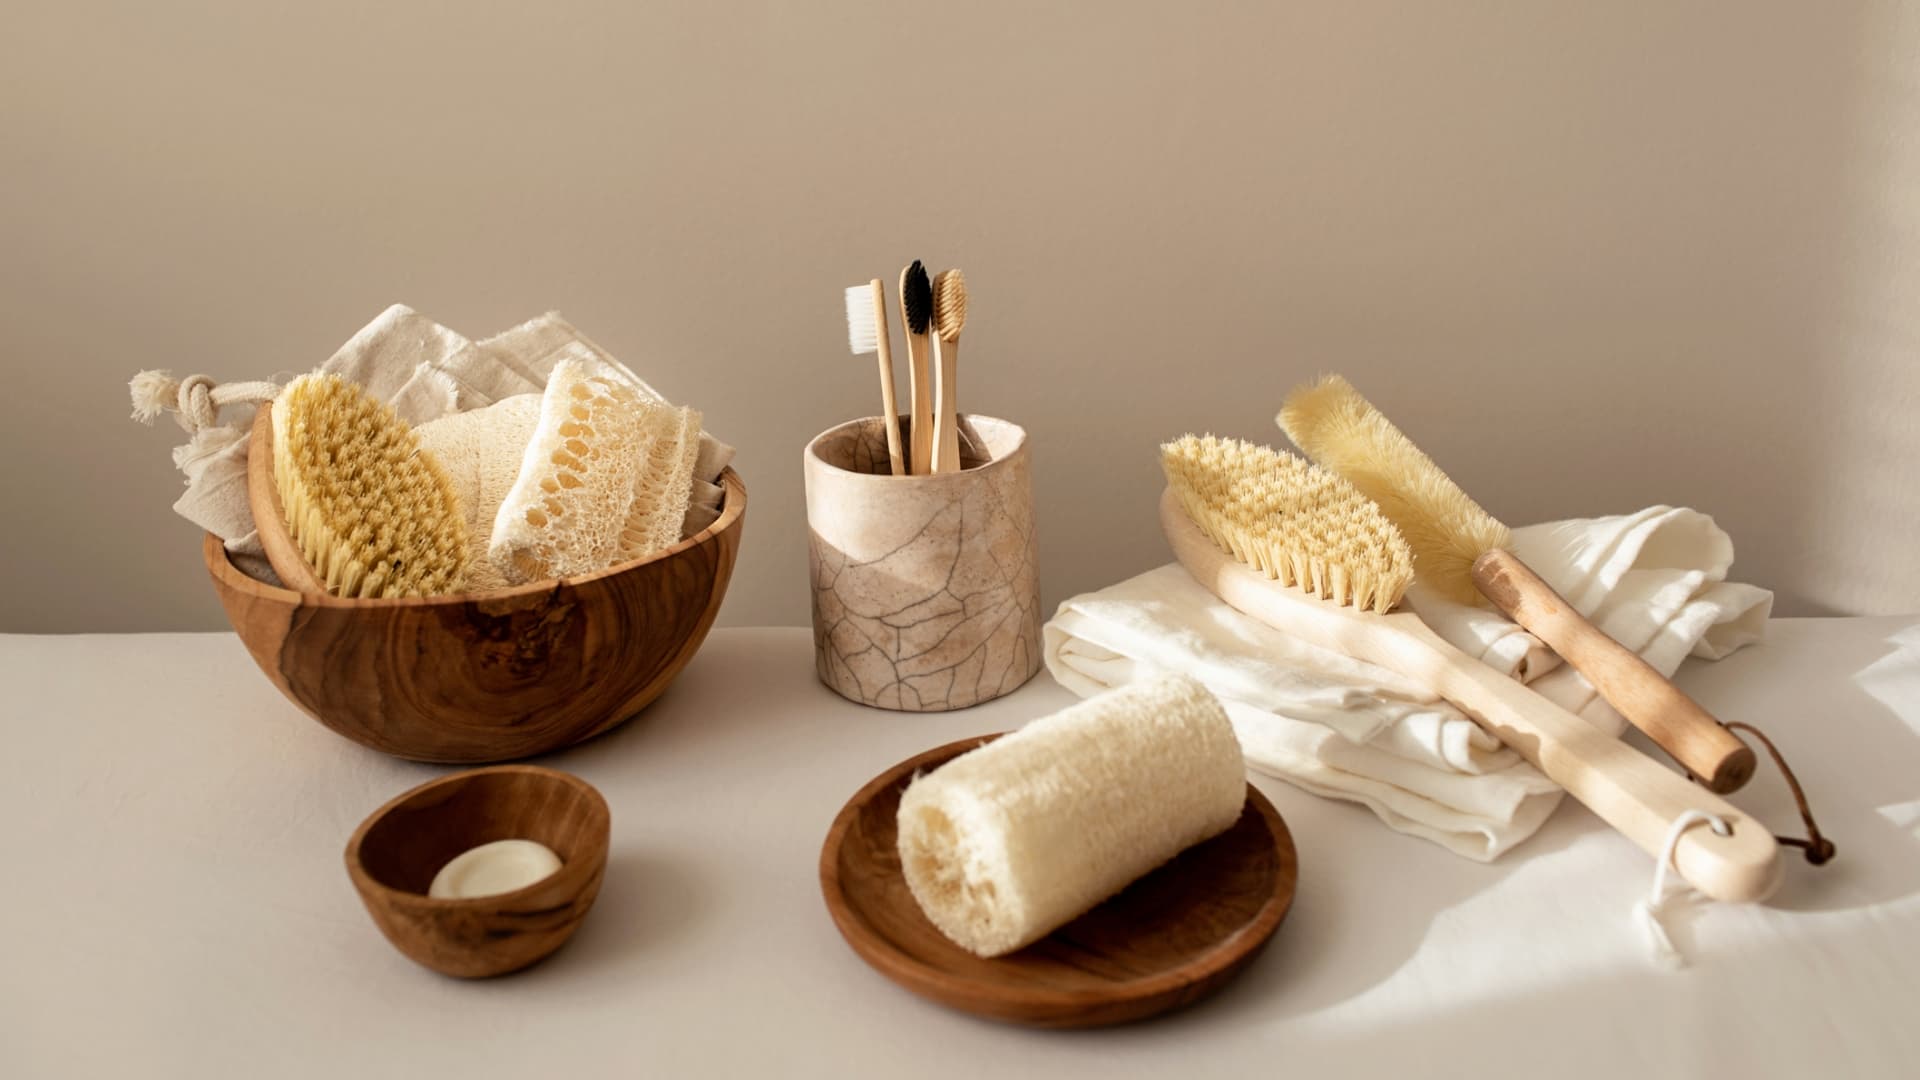 Styled flat lay of environmentally friendly bathroom products including clothes, brushes and toothbrushes.